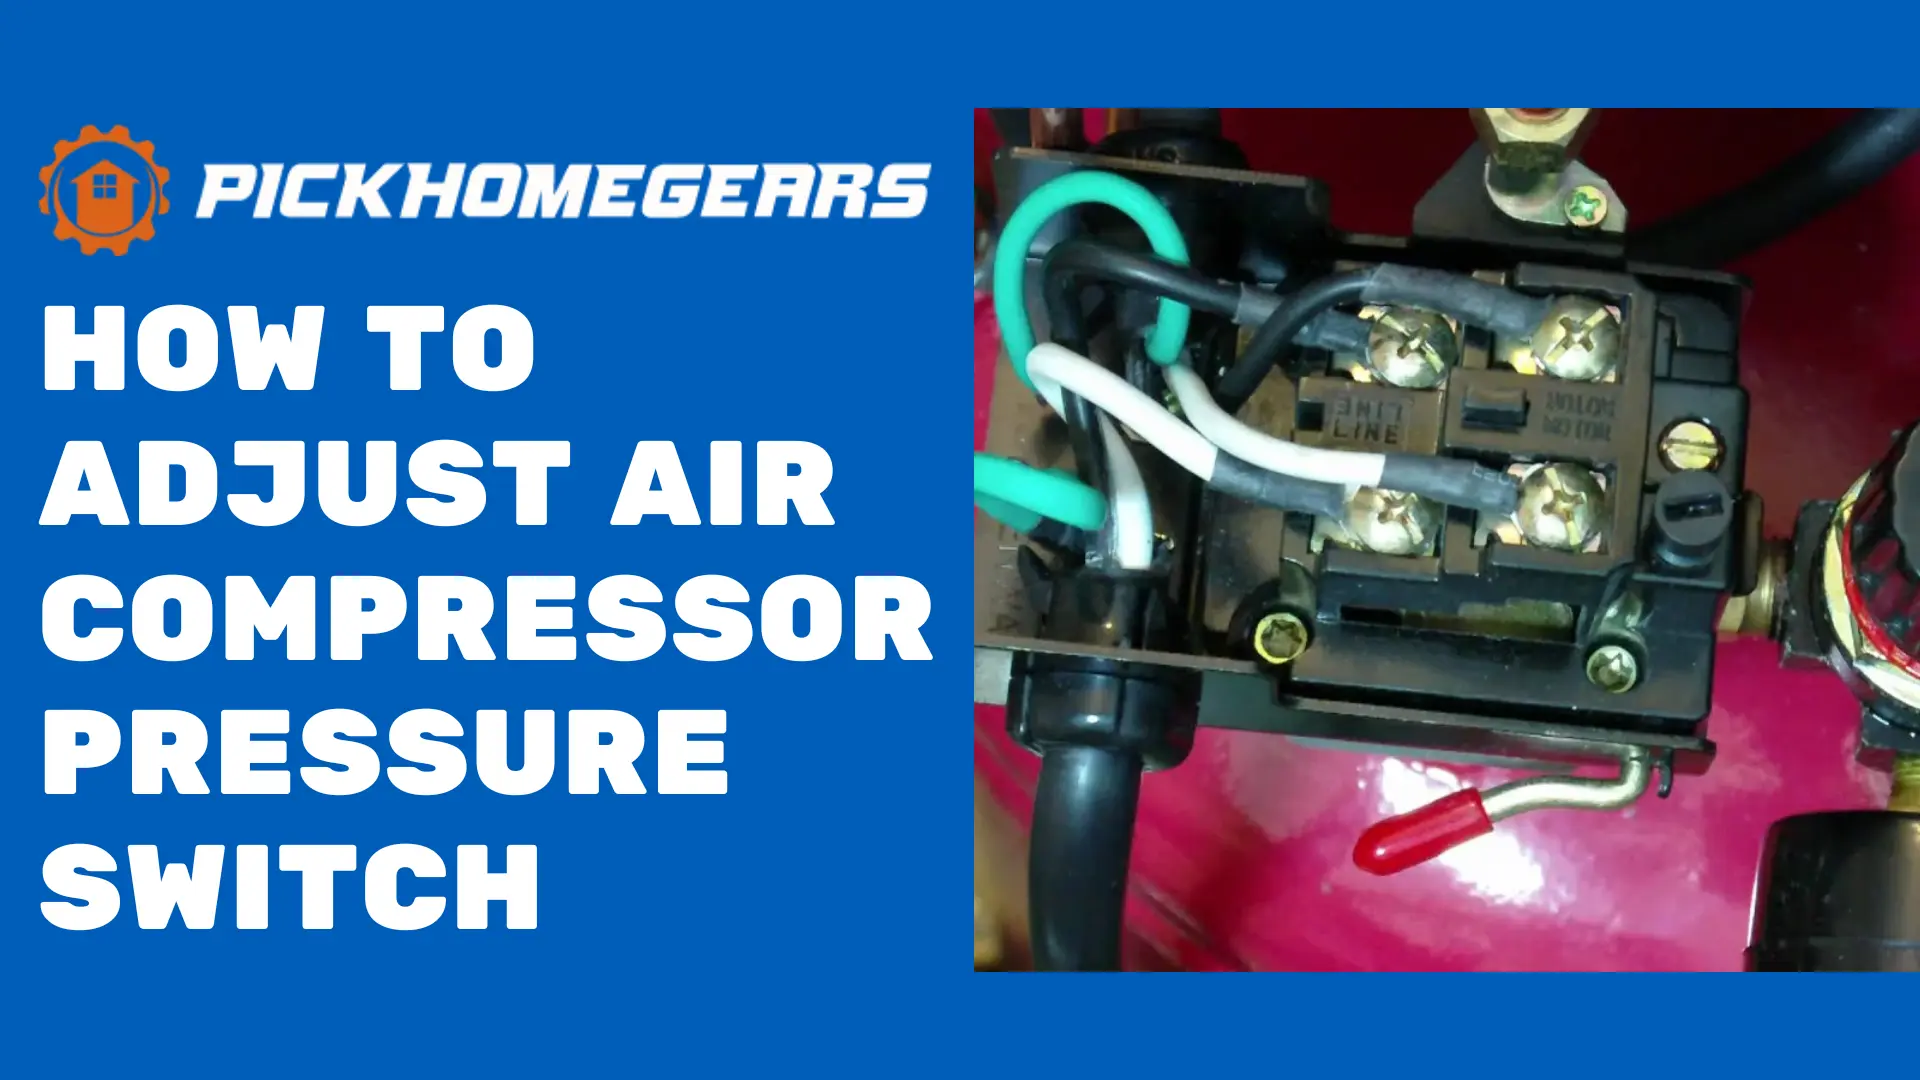 How to Adjust Air Compressor Pressure Switch